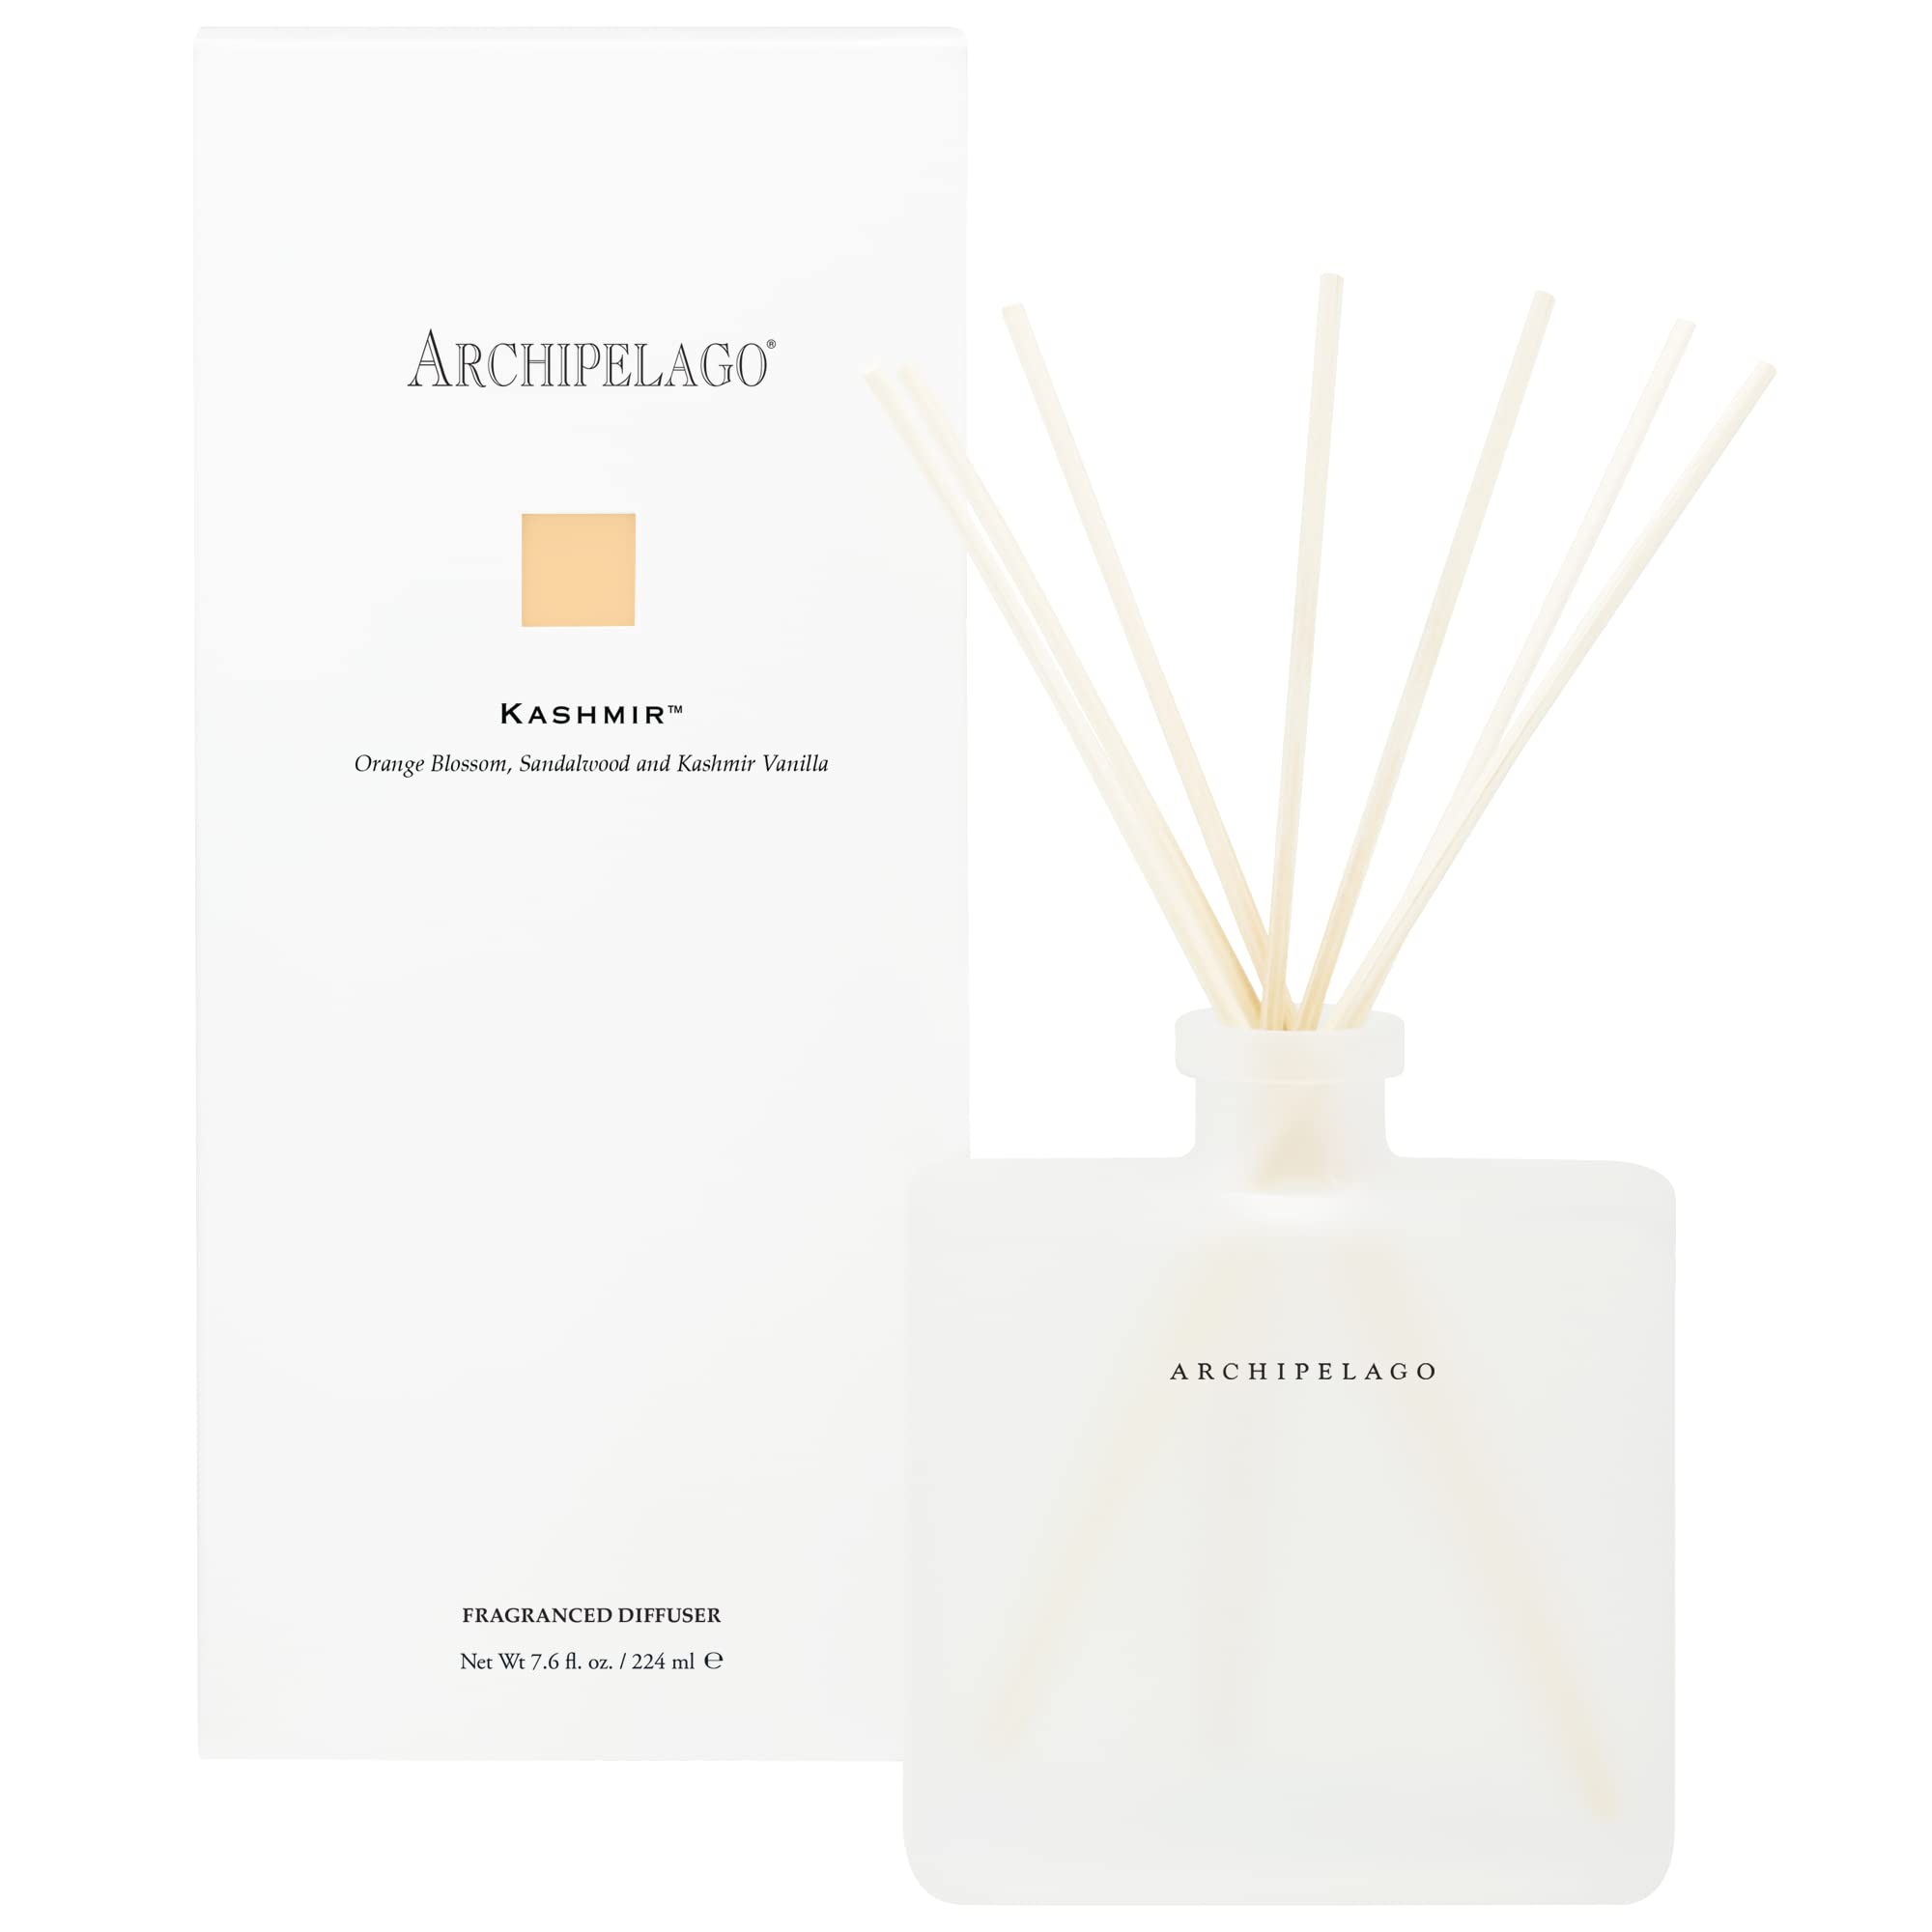 Archipelago Botanicals Kashmir Reed Diffuser | Includes Fragrance Oil, Frosted Glass Vessel and 10 Diffuser Reeds | Perfect for Home, Office or a Gift (7.6 fl oz)